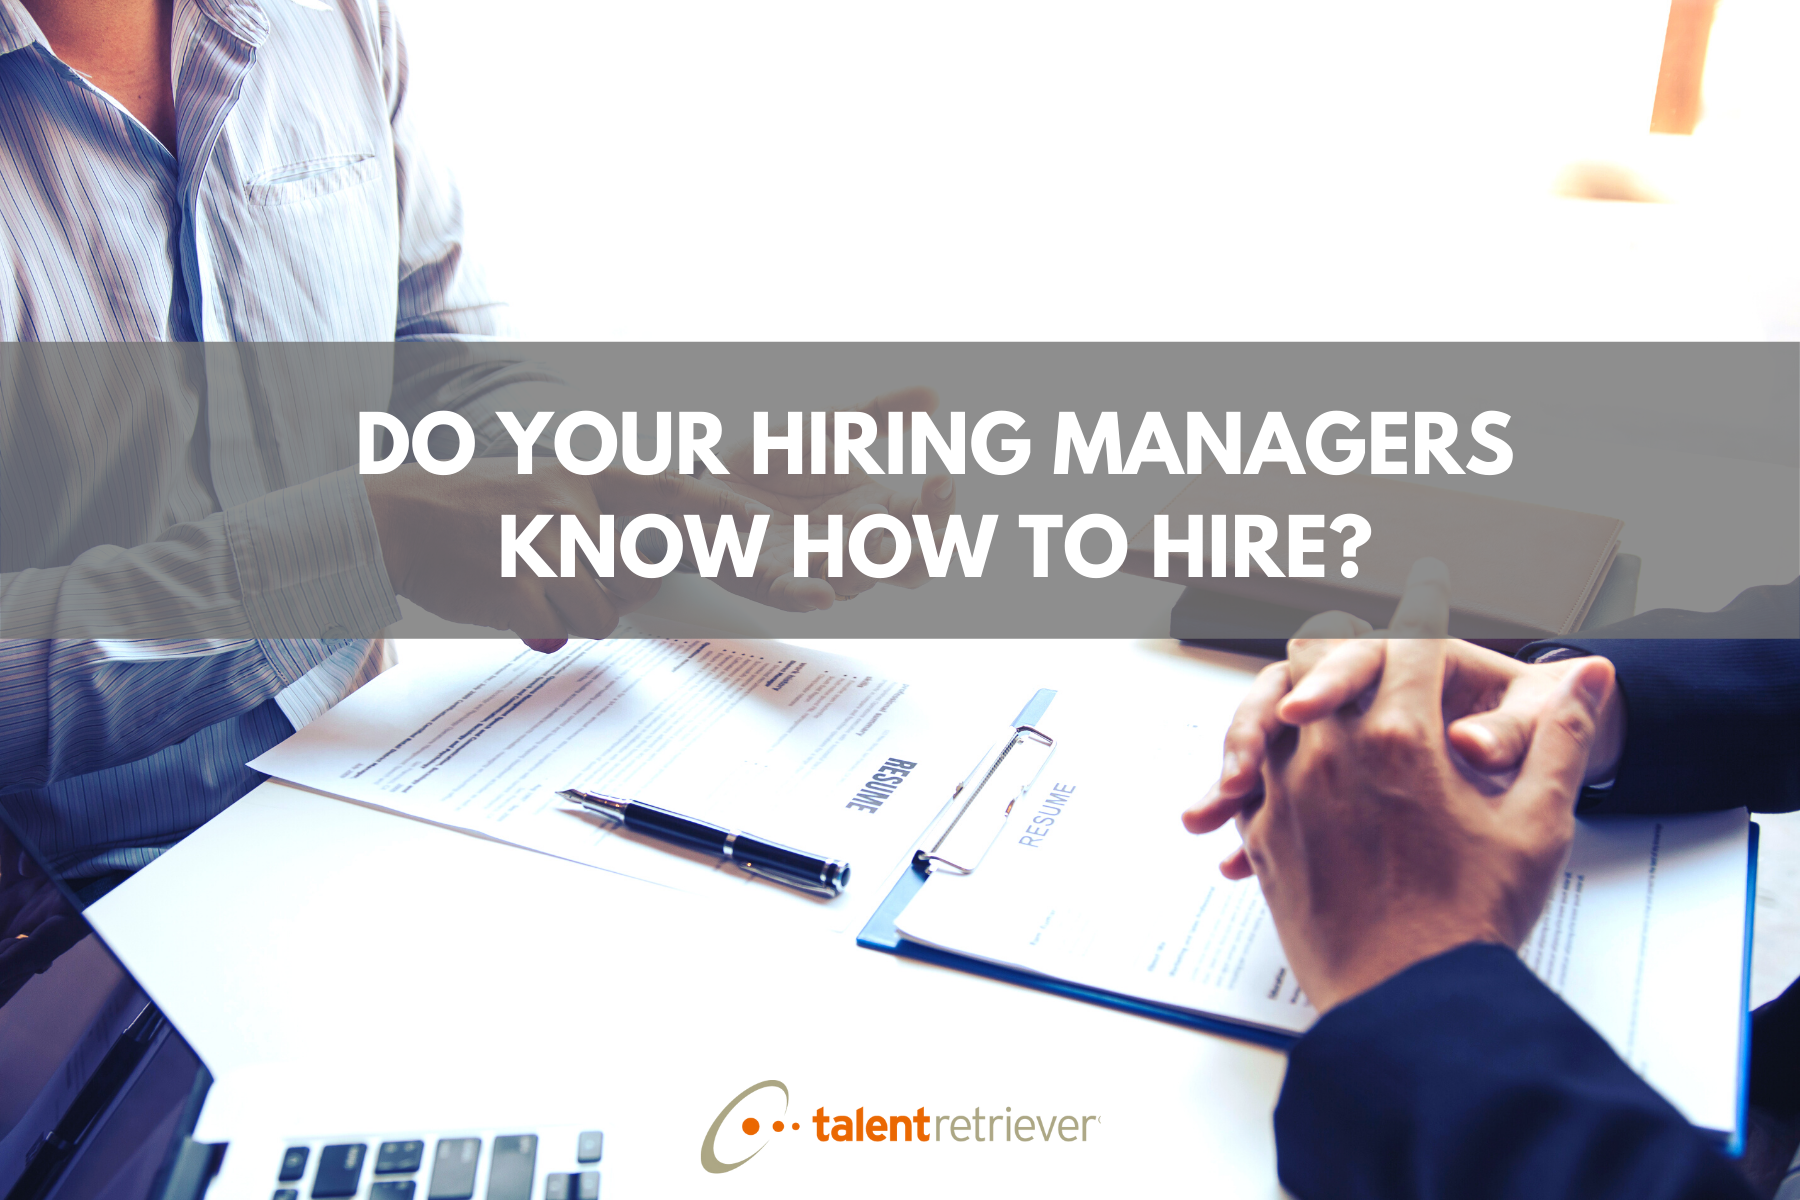 Do Your Hiring Managers Know How to Hire?